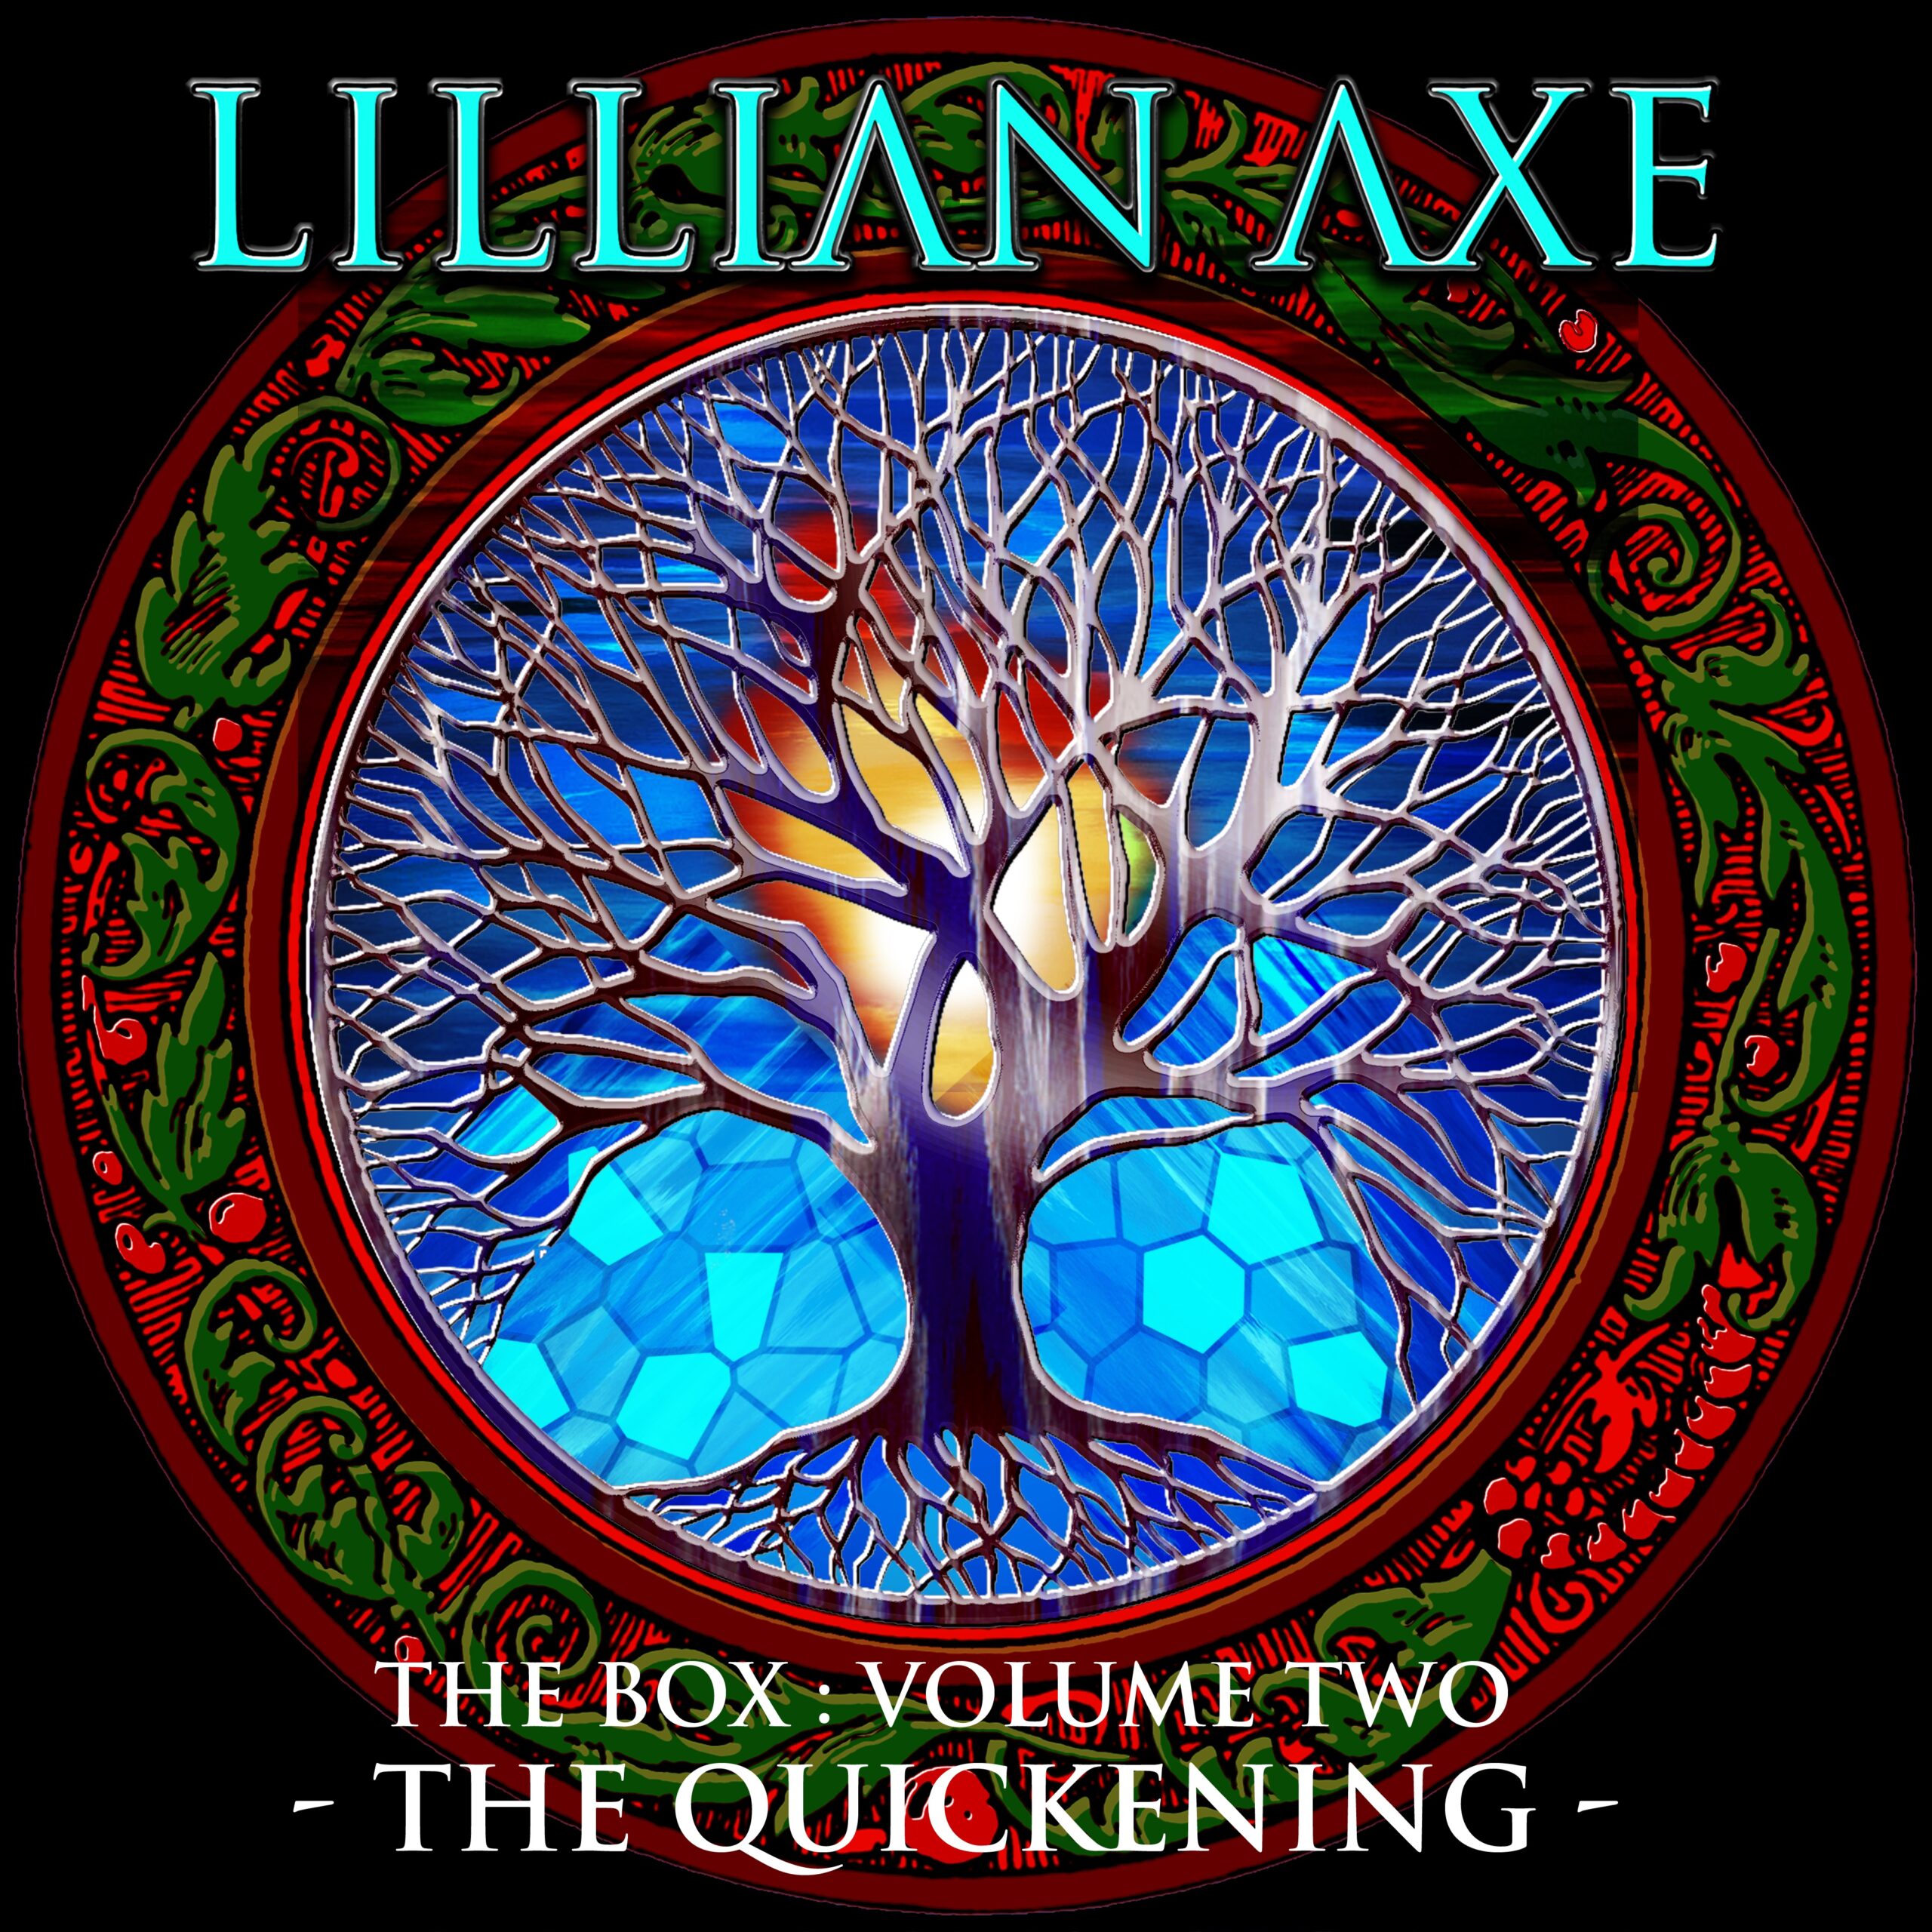 Lillian Axe: The Box Volume Two – The Quickening (6 CD Box Set - Imported)